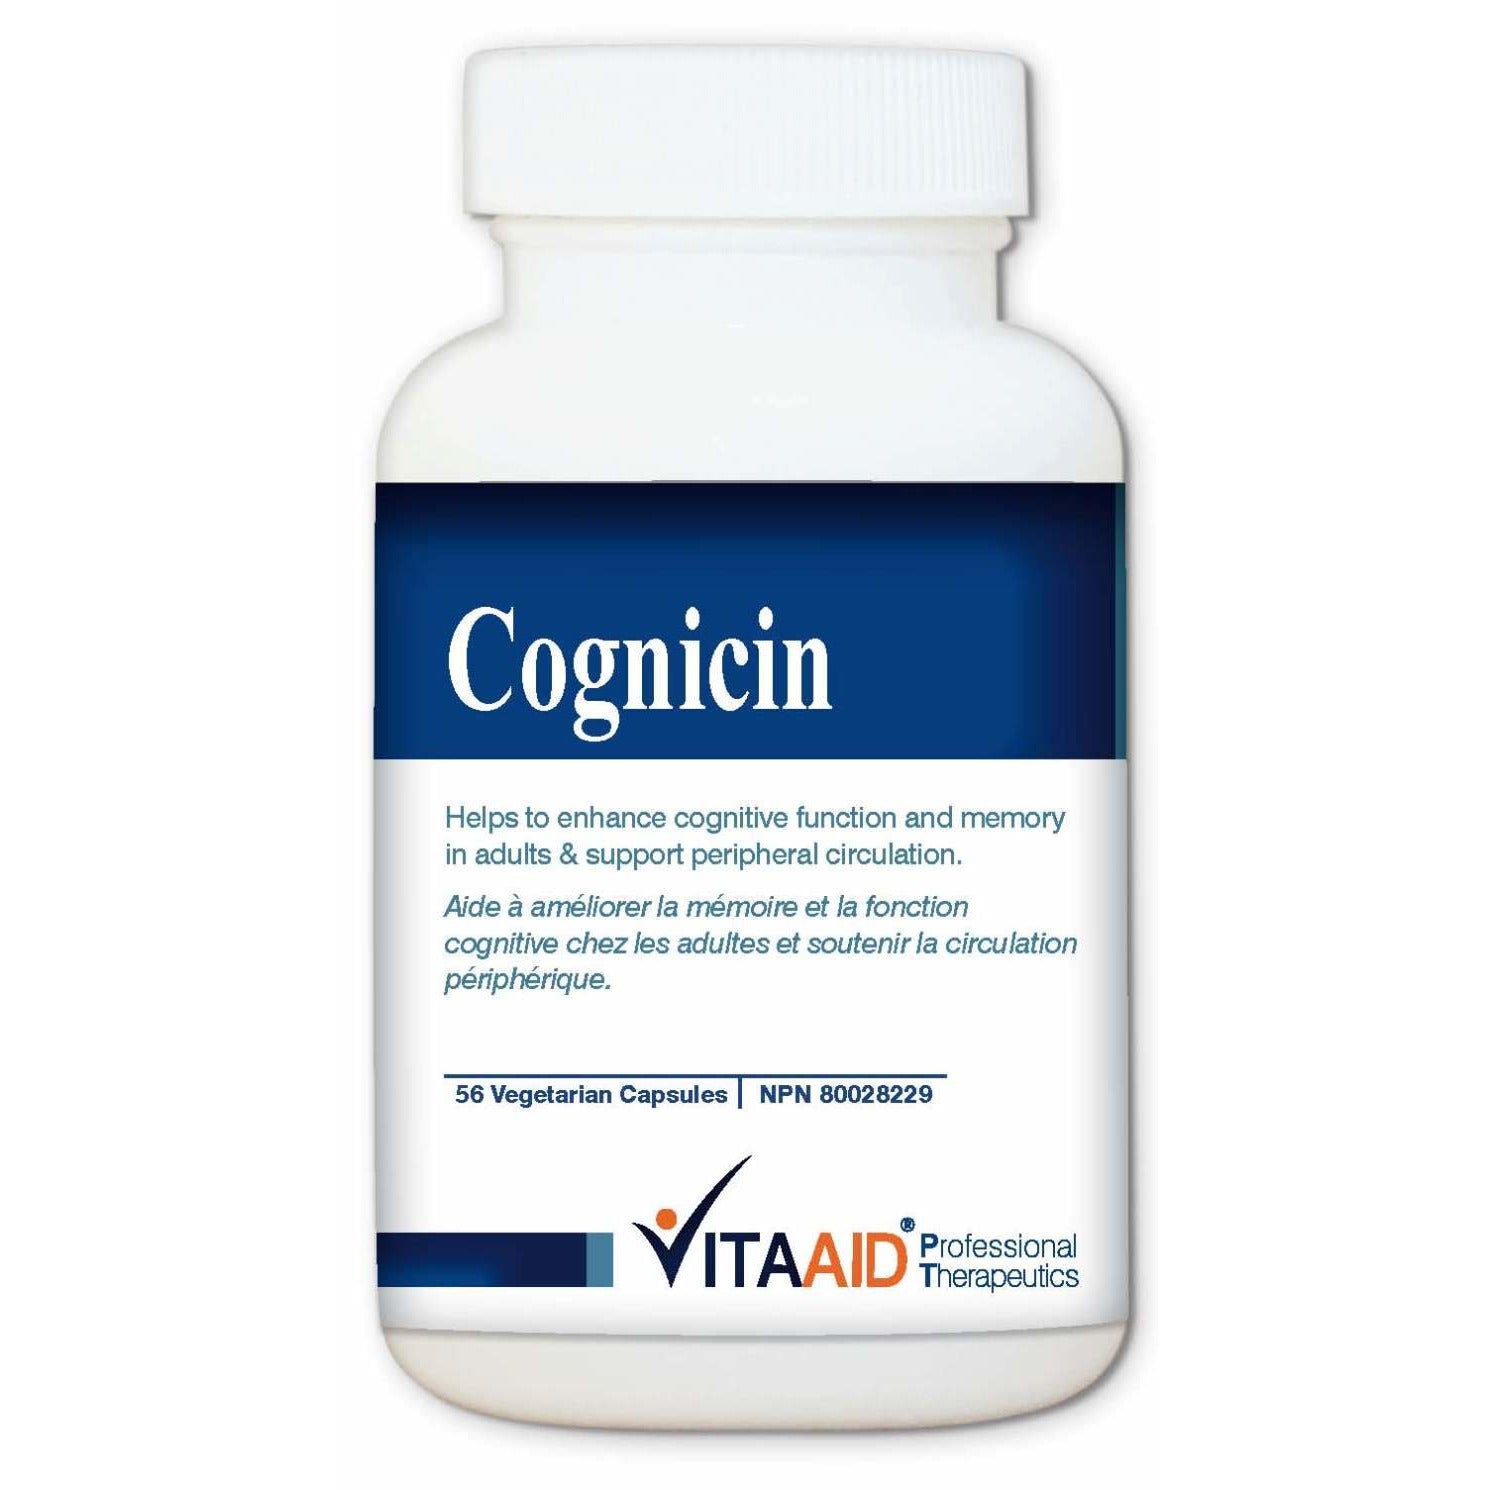 Cognicin Protects against Age-Related Cognitive Decline and Improves Memory 56 veg caps